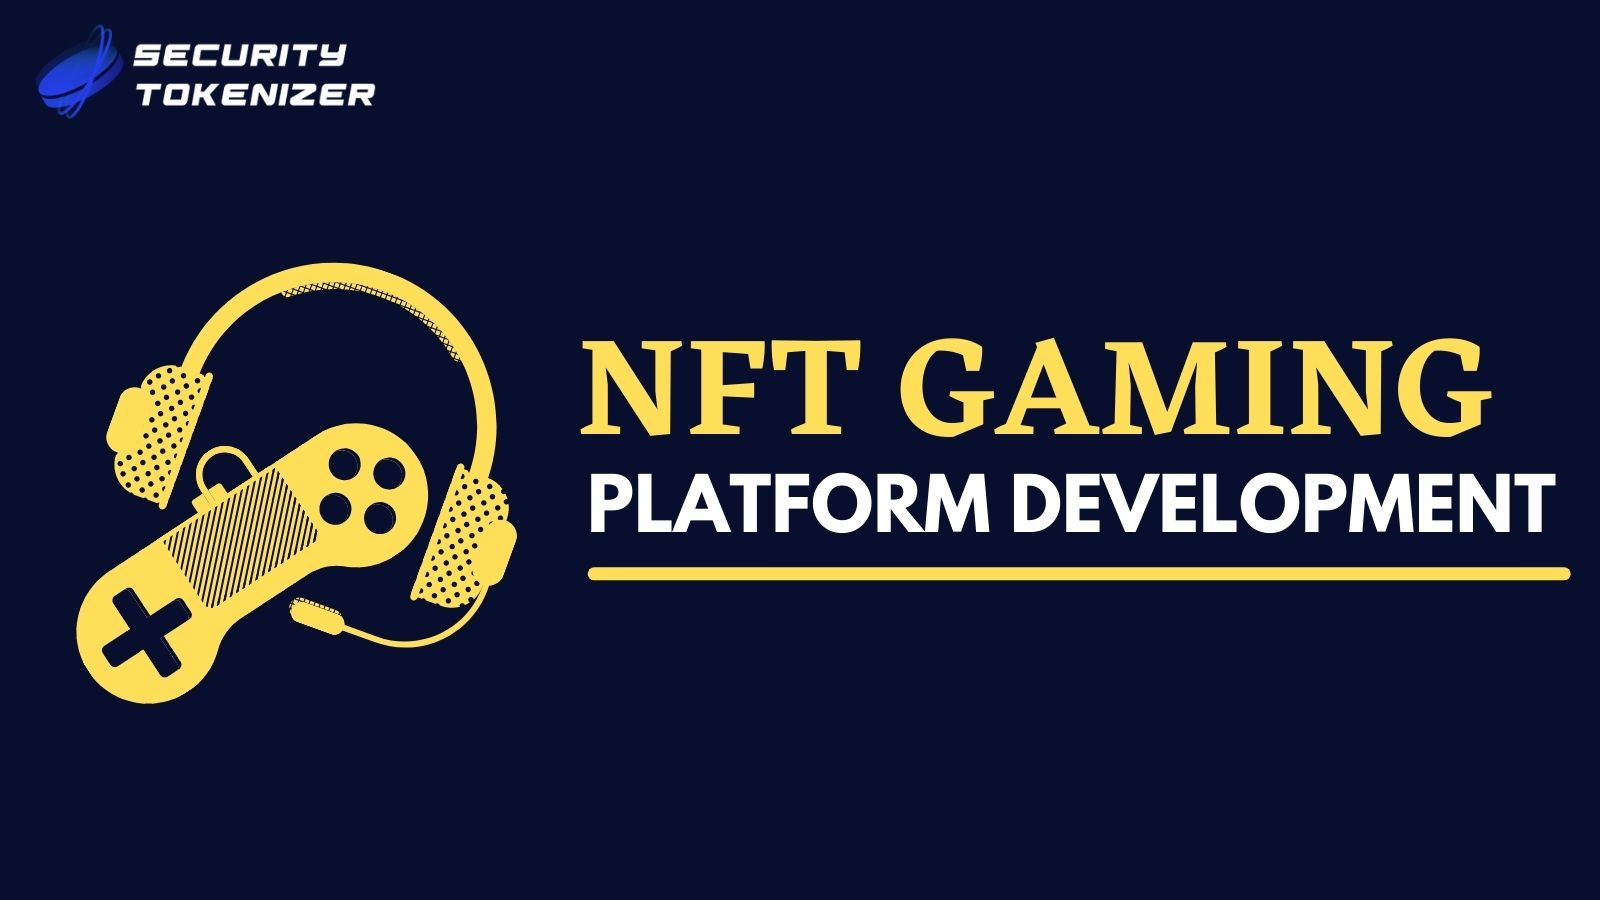 Article about Effective NFT Gaming Platform Development of Security Tokenizer